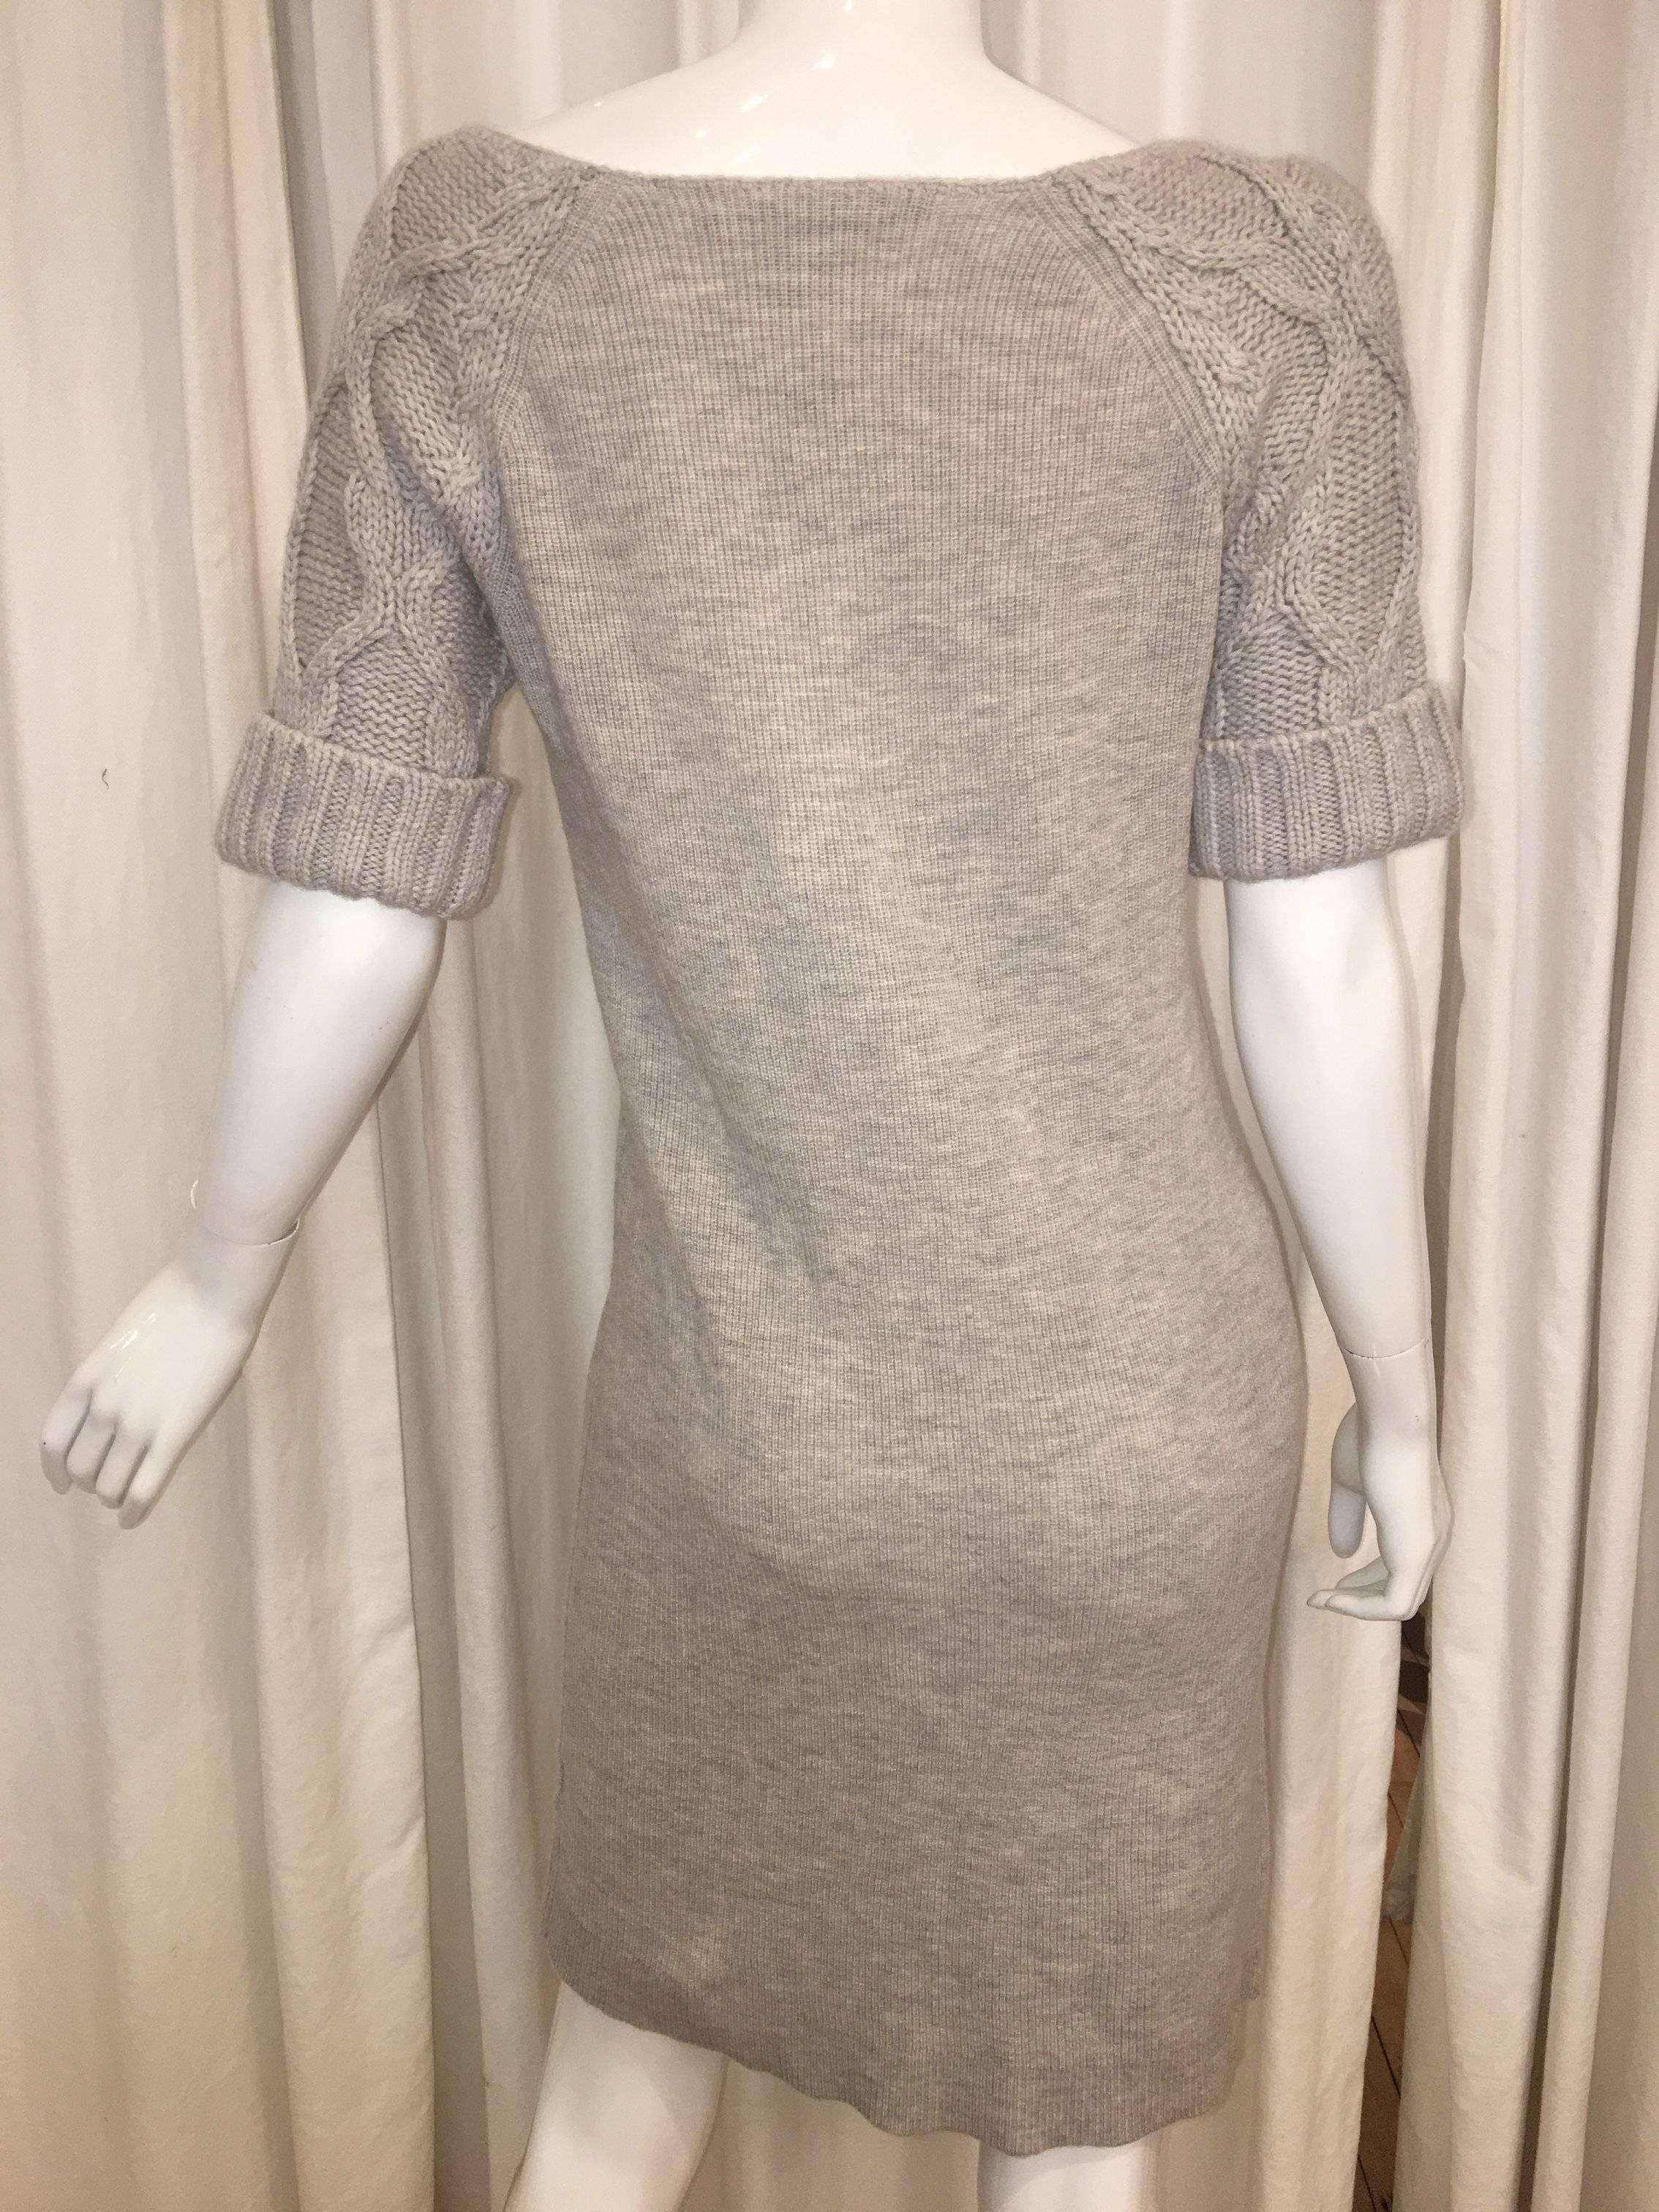 Brown Marc by Marc Jacobs Sweater Dress